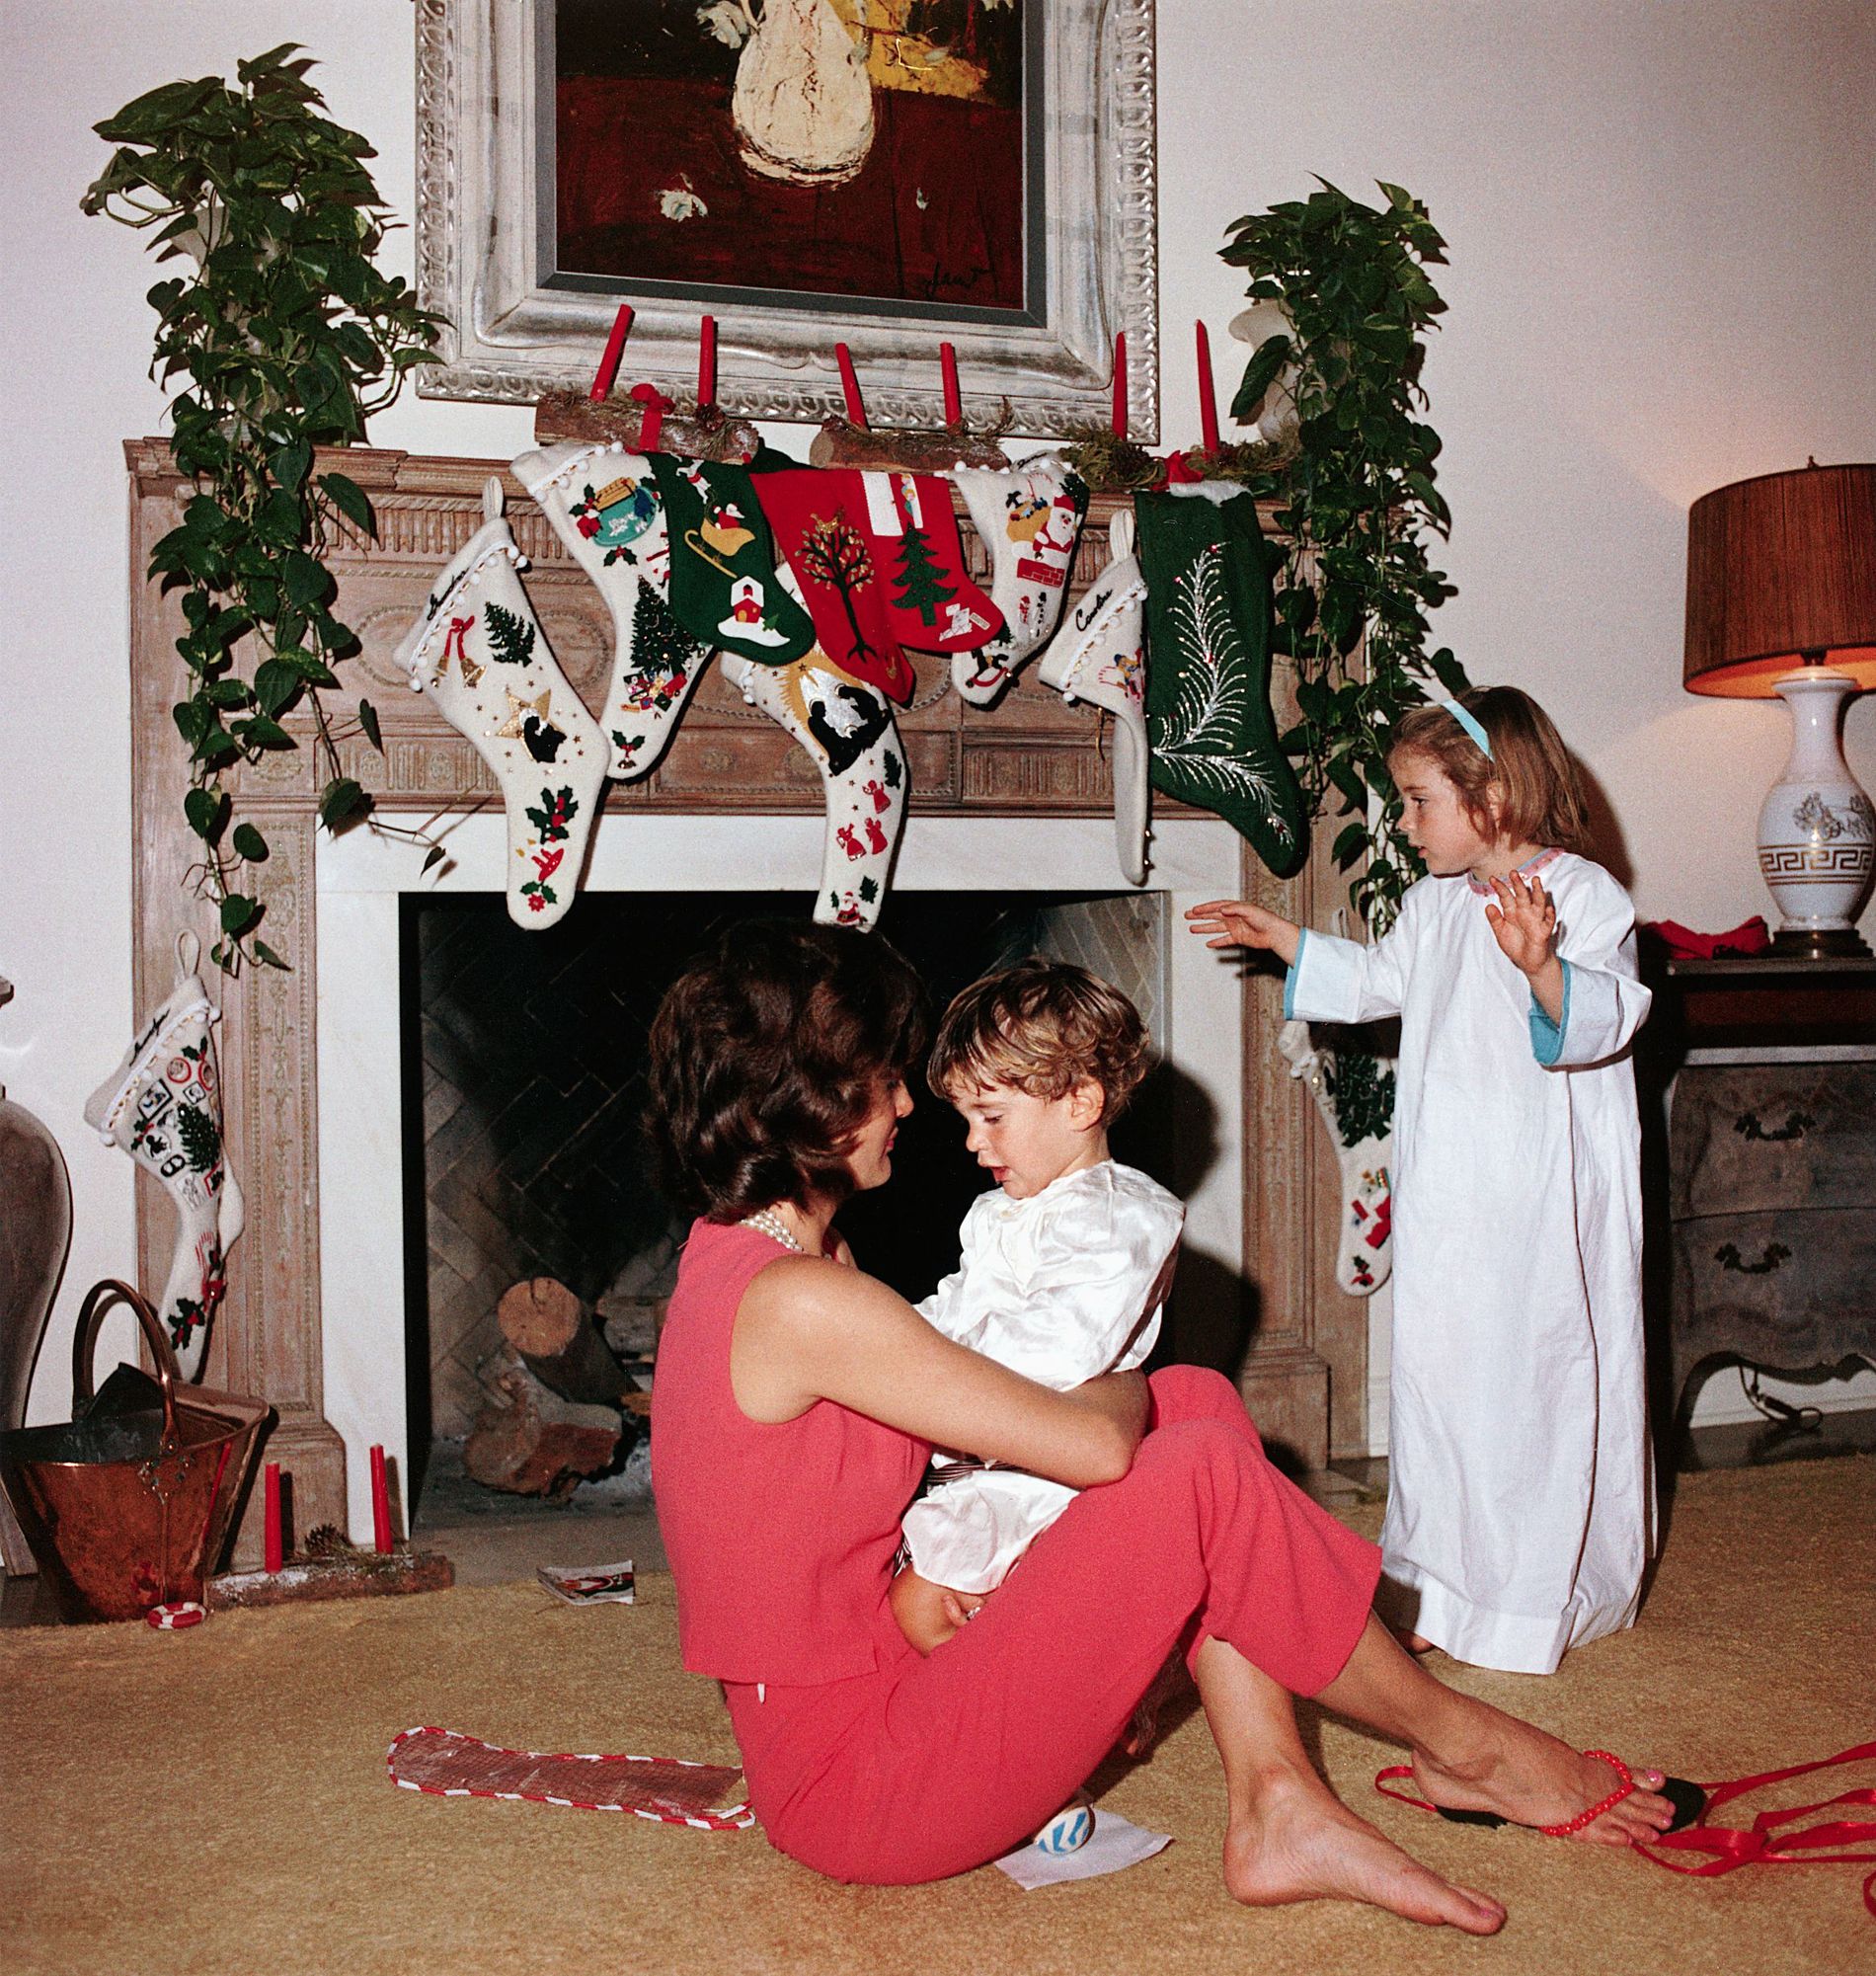 Jacqueline Kennedy with the children on Christmas morning. She sits on the floor, holding John on her lap, and Caroline stands nearby in her nightgown. Several stockings hang from the mantle.